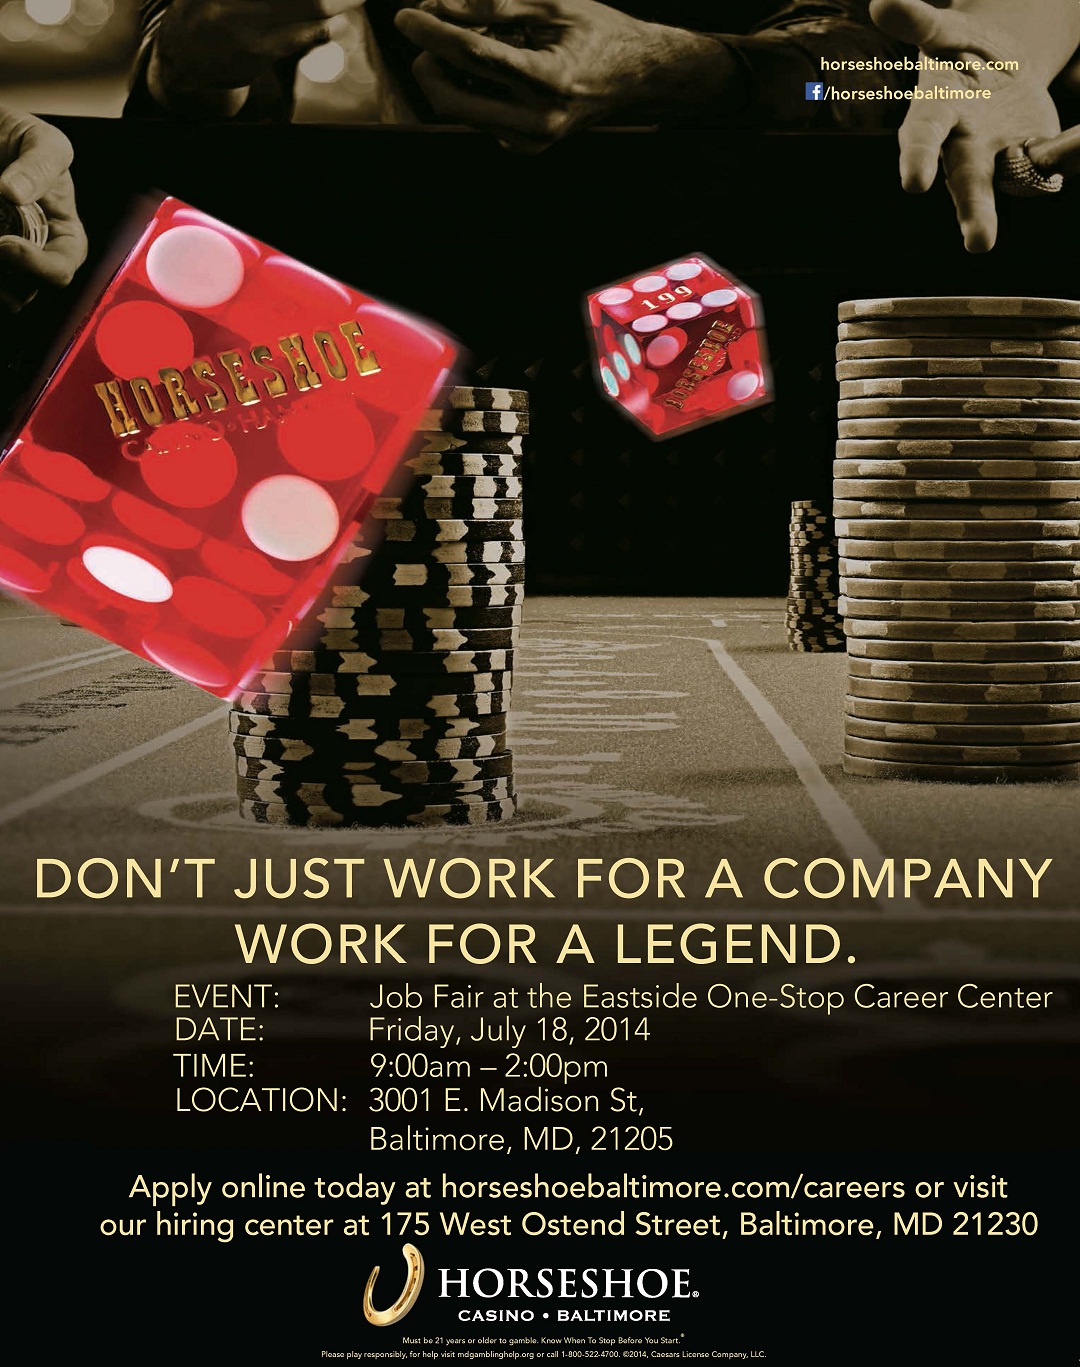 Don't just work for a company. Work for a legend. Horseshoe Baltimore Casino